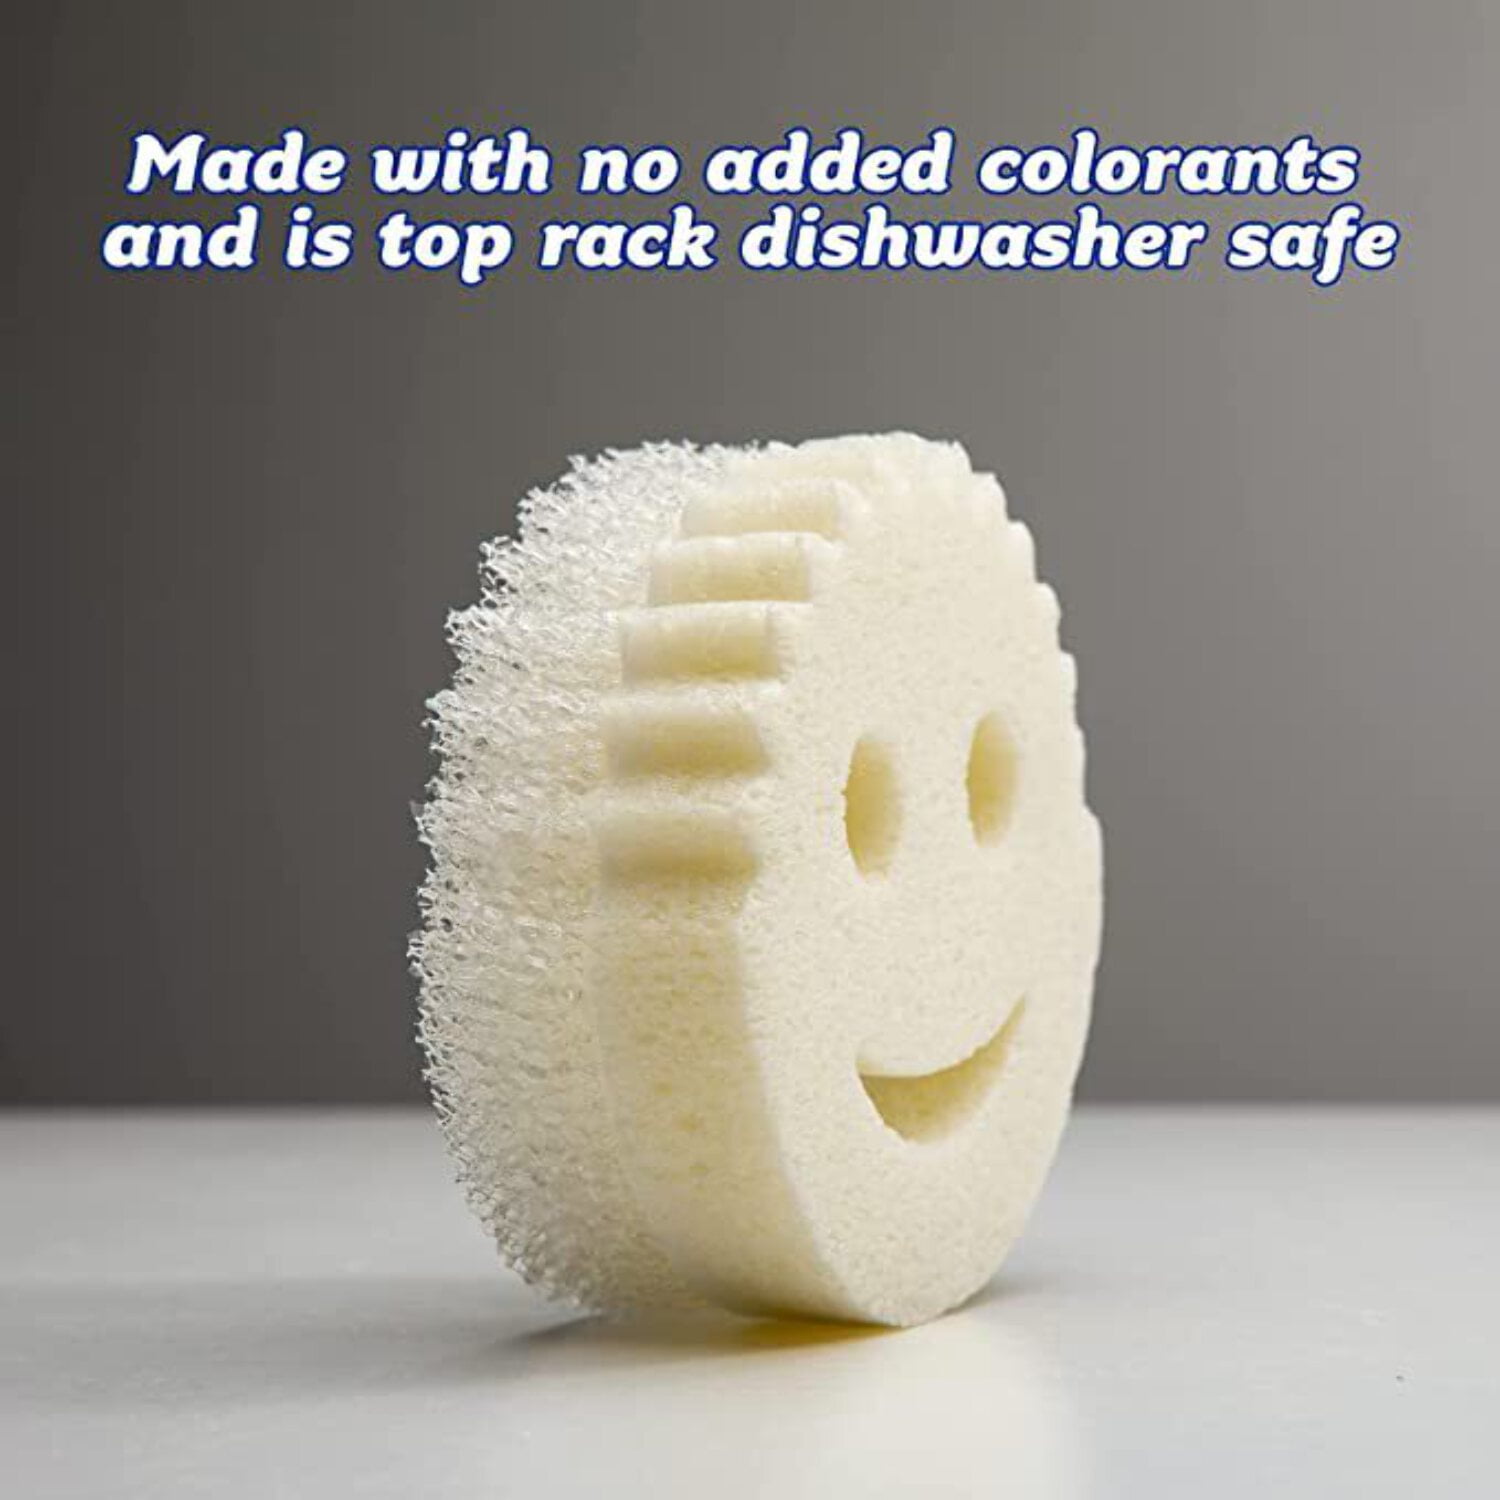 Scrub Daddy UK - Power Paste is our powerful natural paste for cleaning,  just dampen the sponge and swirl on the paste to produce a cleaning foam 💪  #PowerPaste #ScrubDaddy #ScrubMommy #Cleaning #